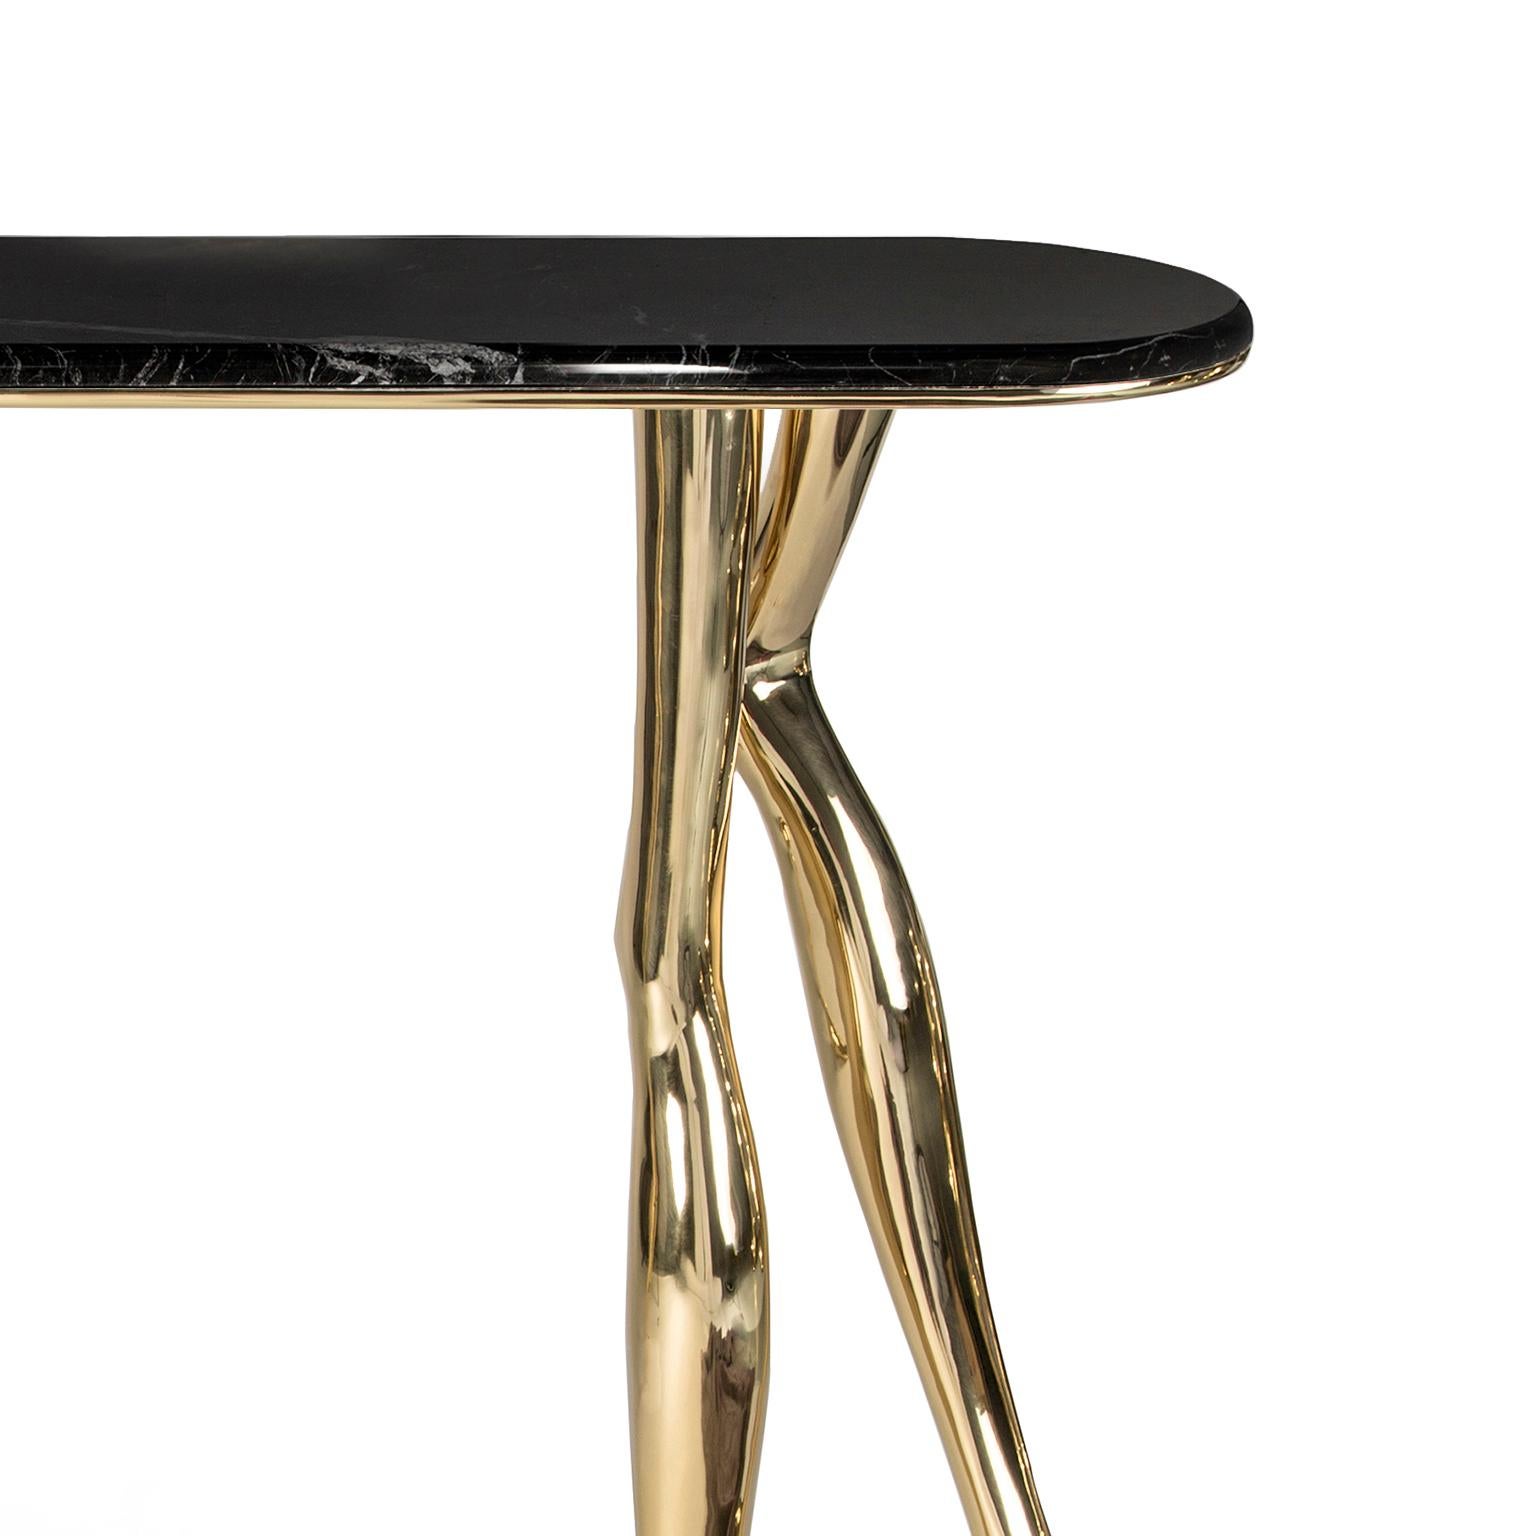 Portuguese Contemporary Monroe Console Table, Polished Brass, Nero Marquina Marble For Sale